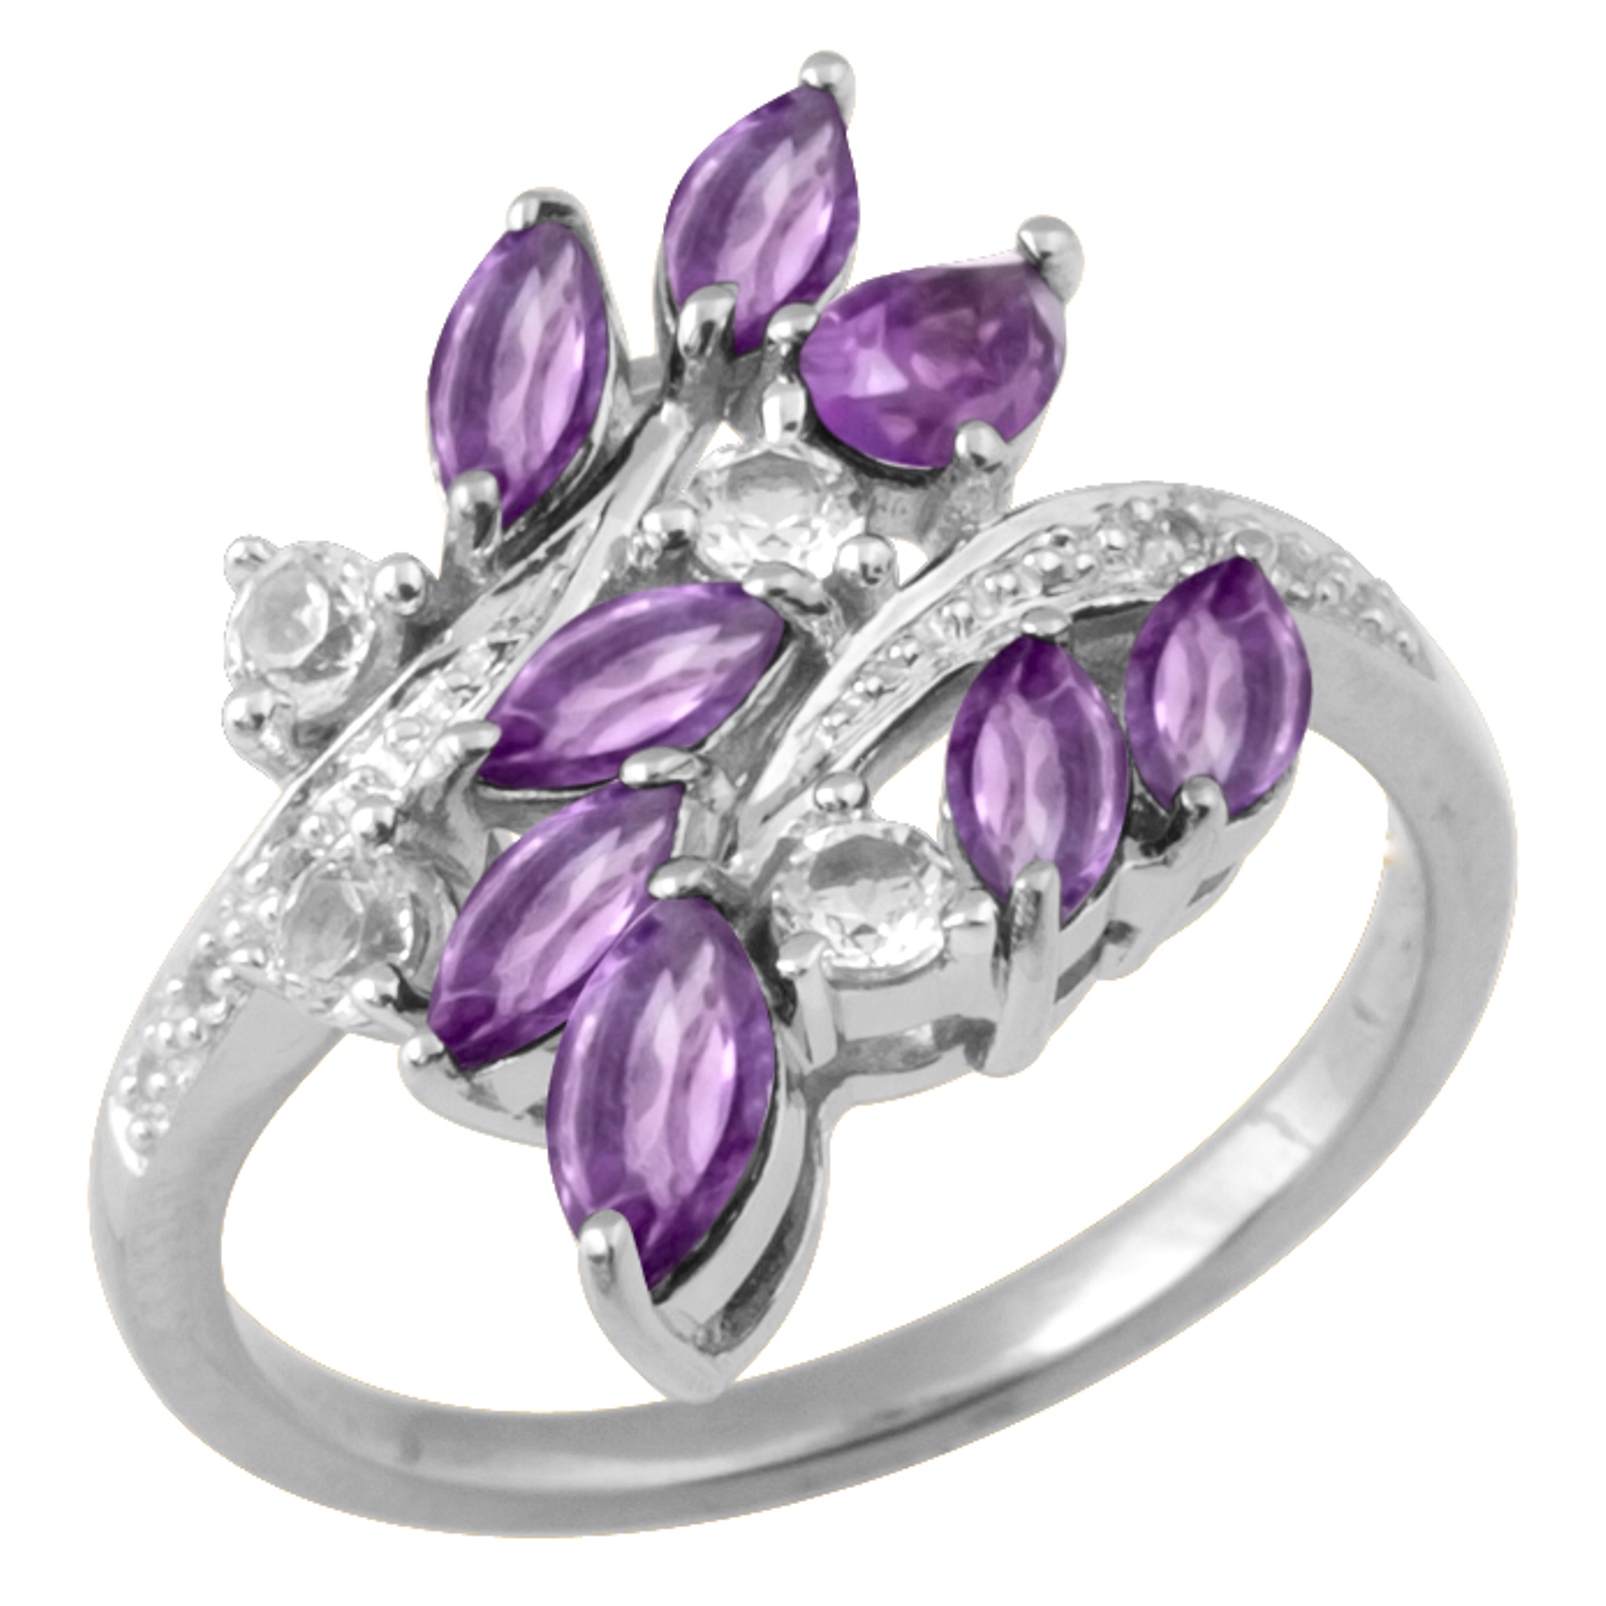 Sterling Silver Ring with Amethyst  Marques & Pear Stones